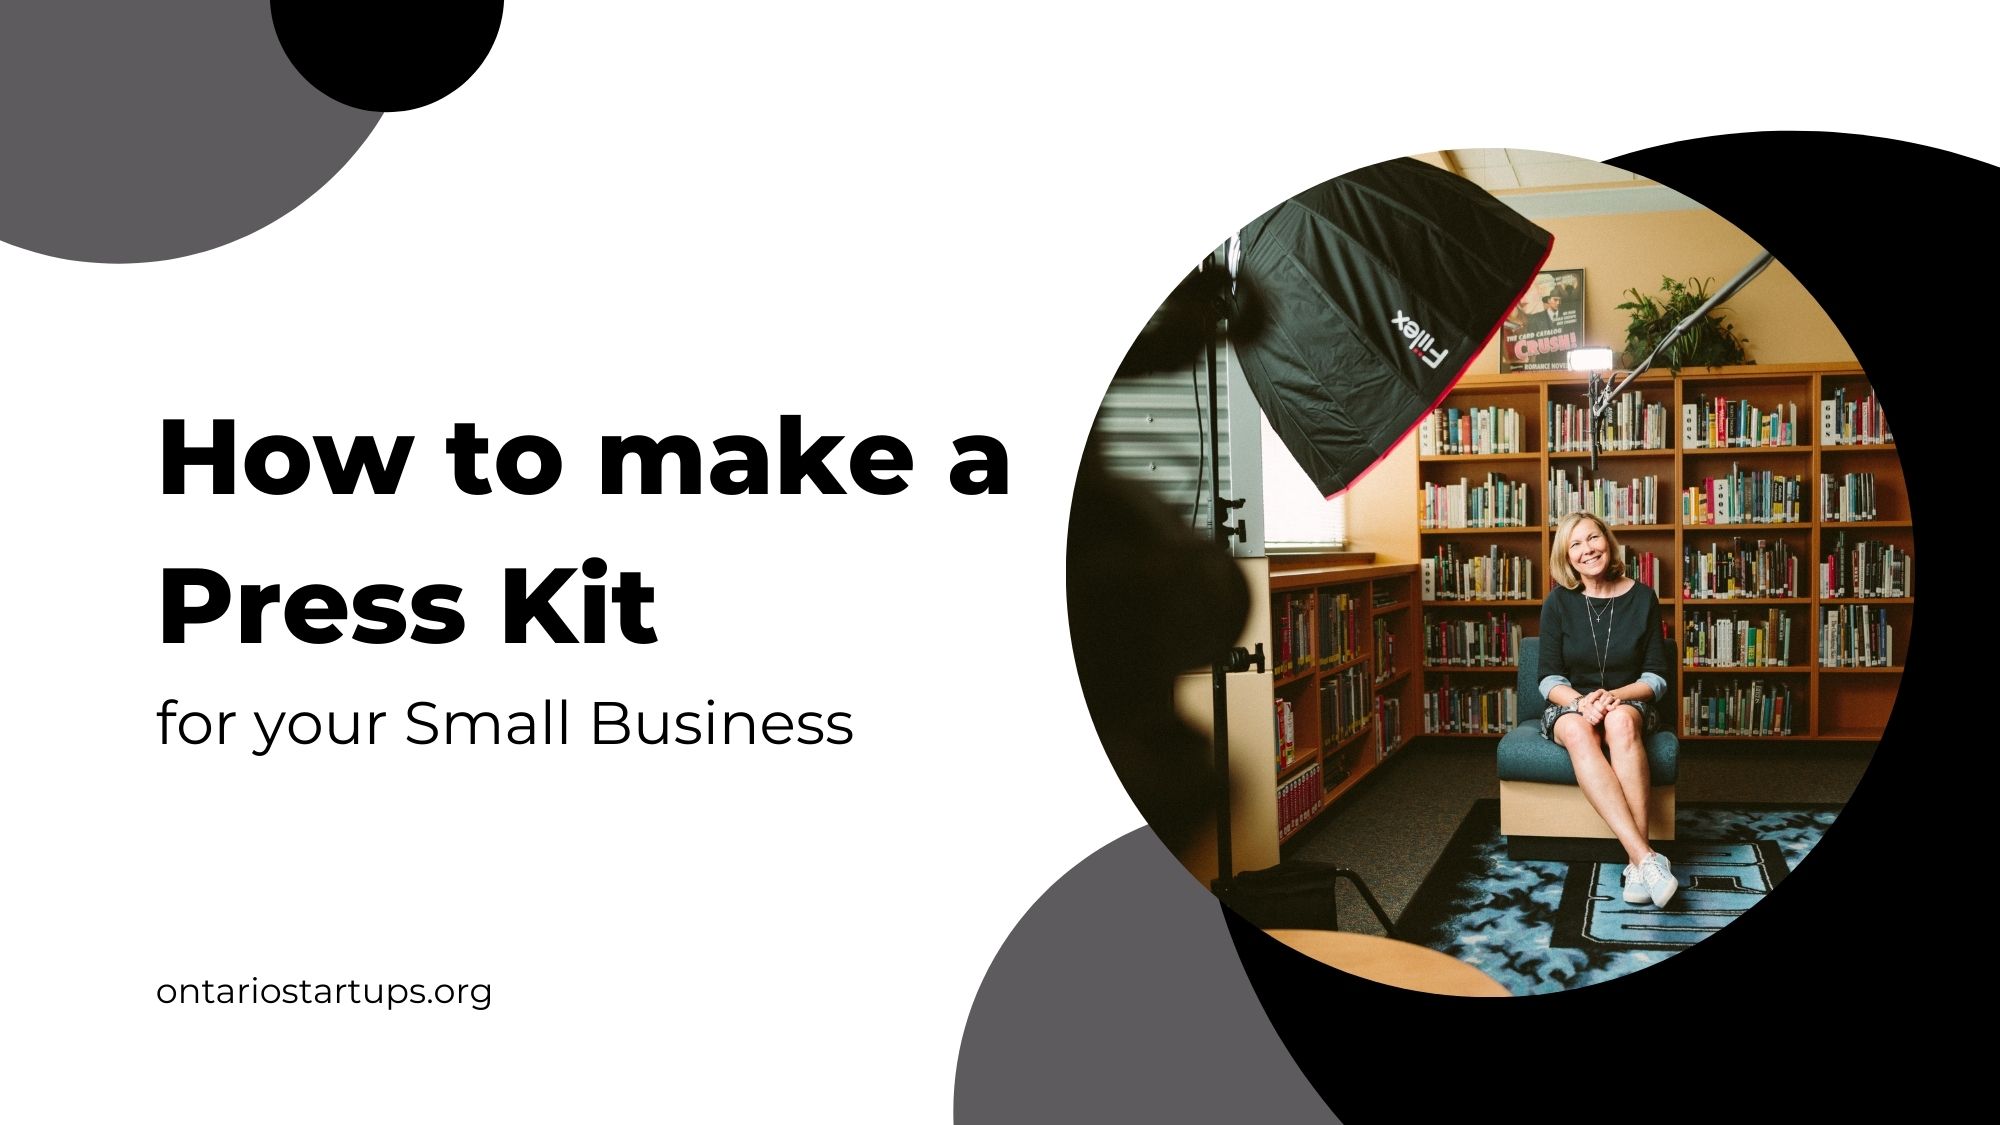 how to make a press kit for your small business in Ontario